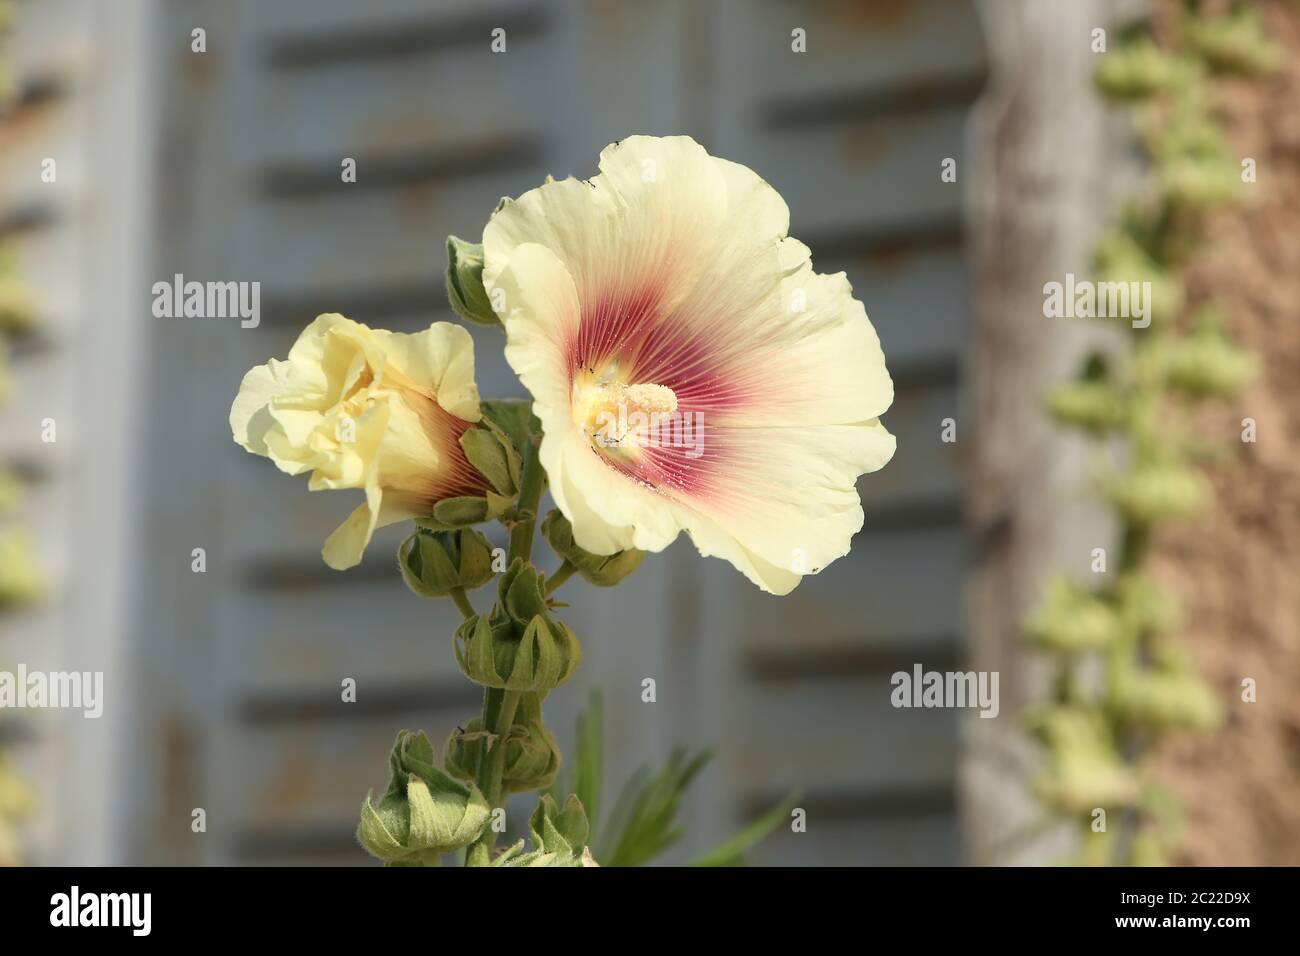 Beautiful hollyhock flower in bloom with cream & pink petals, against a traditional wooden building, citadel of Blaye, Gironde department, France. Stock Photo